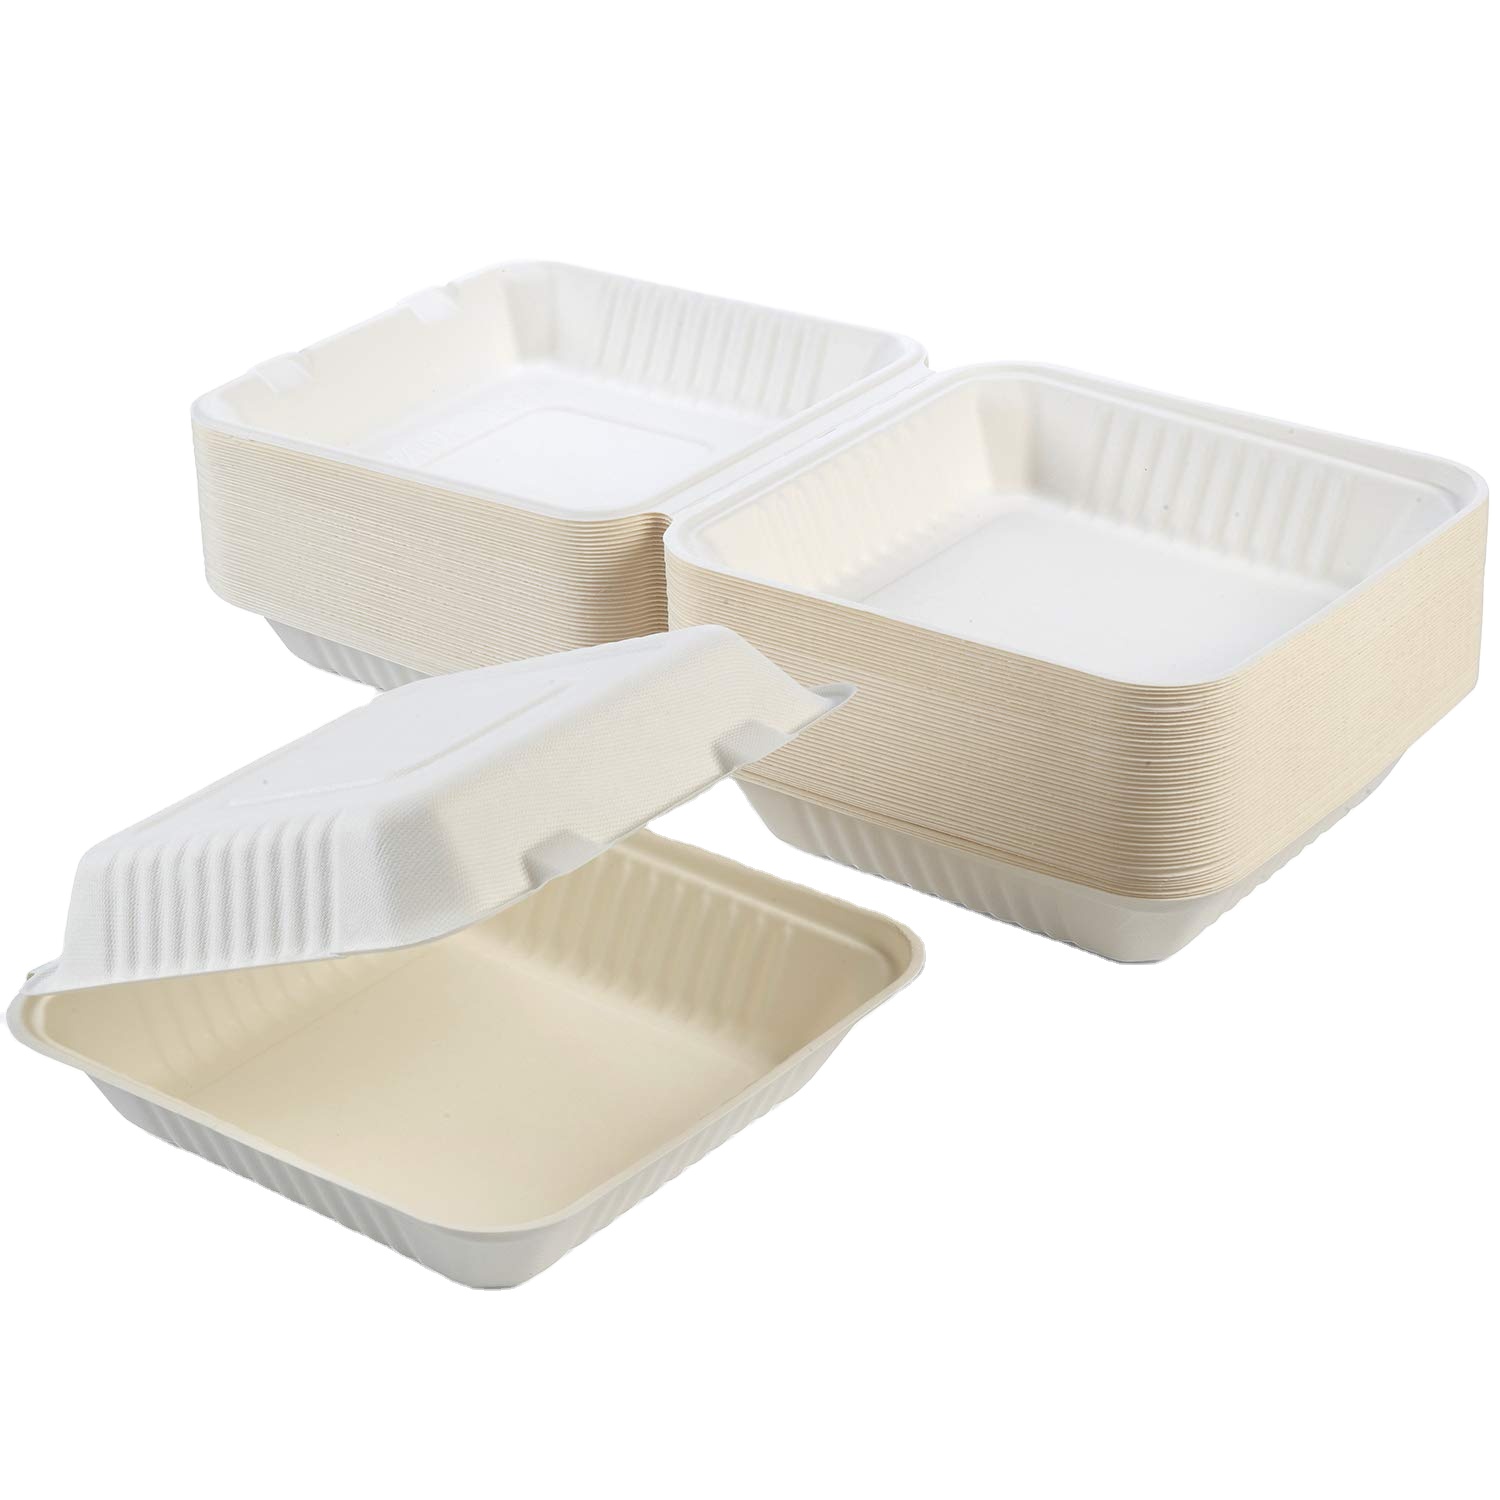 Biodegradable Box Clamshell Packaging Free Bagasse Eco-friendly 8 Food GeoTegrity Disposable Bagasse Sugarcane Lunch PFAS - inch Box